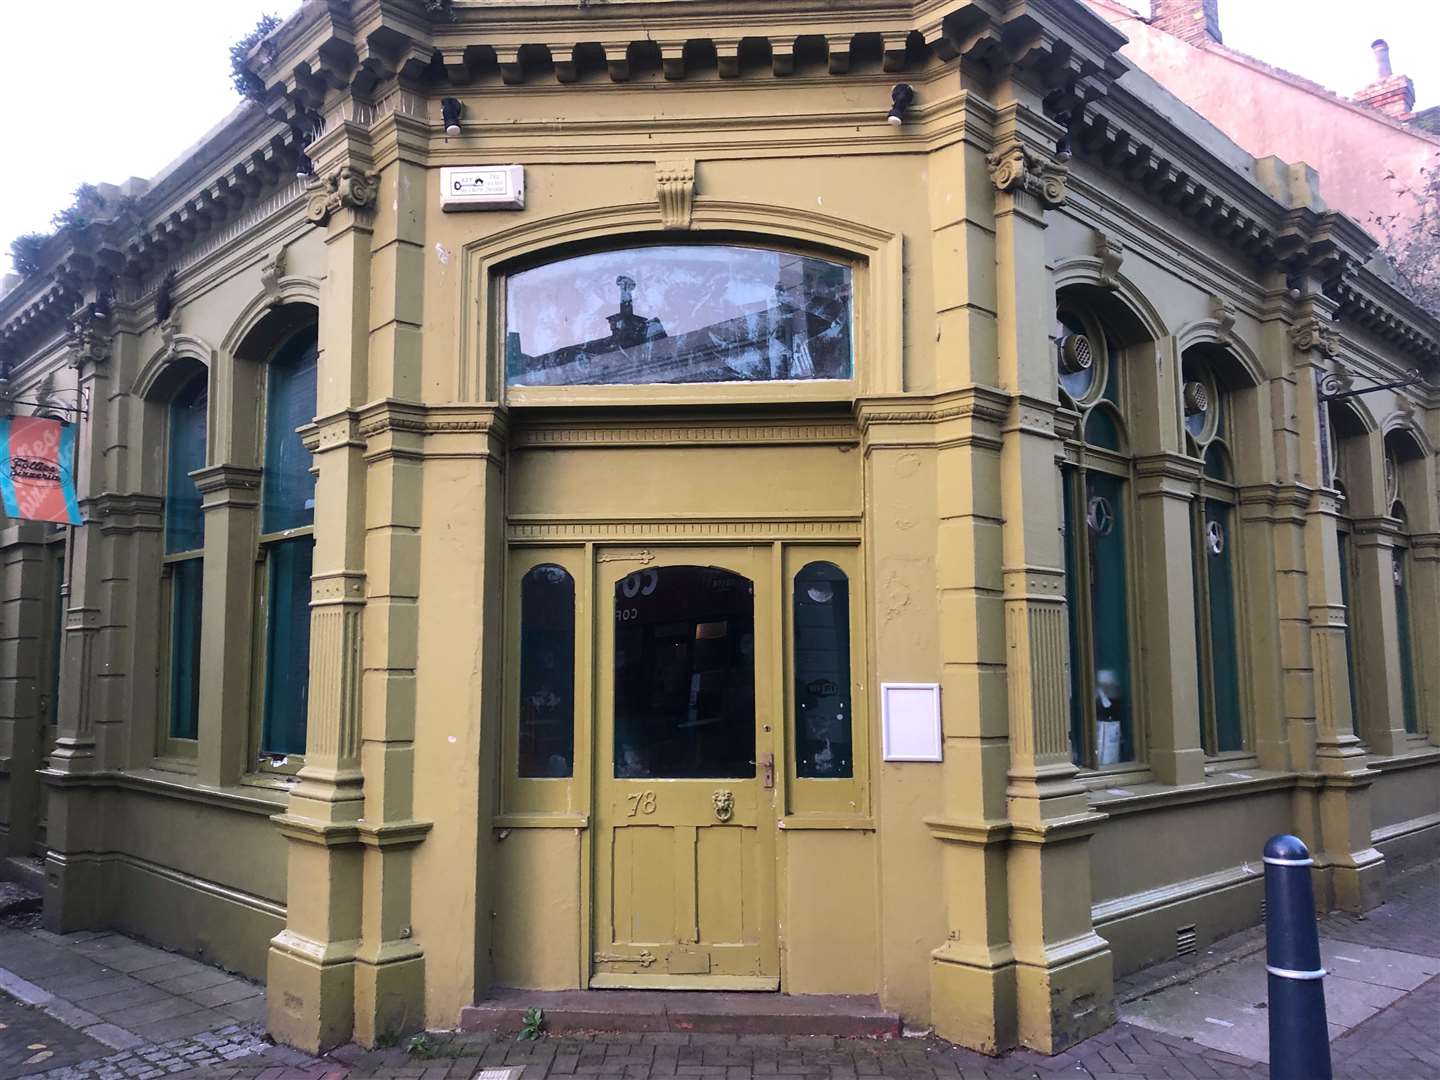 The green exterior of building split opinion when the pizzeria opened in 2017